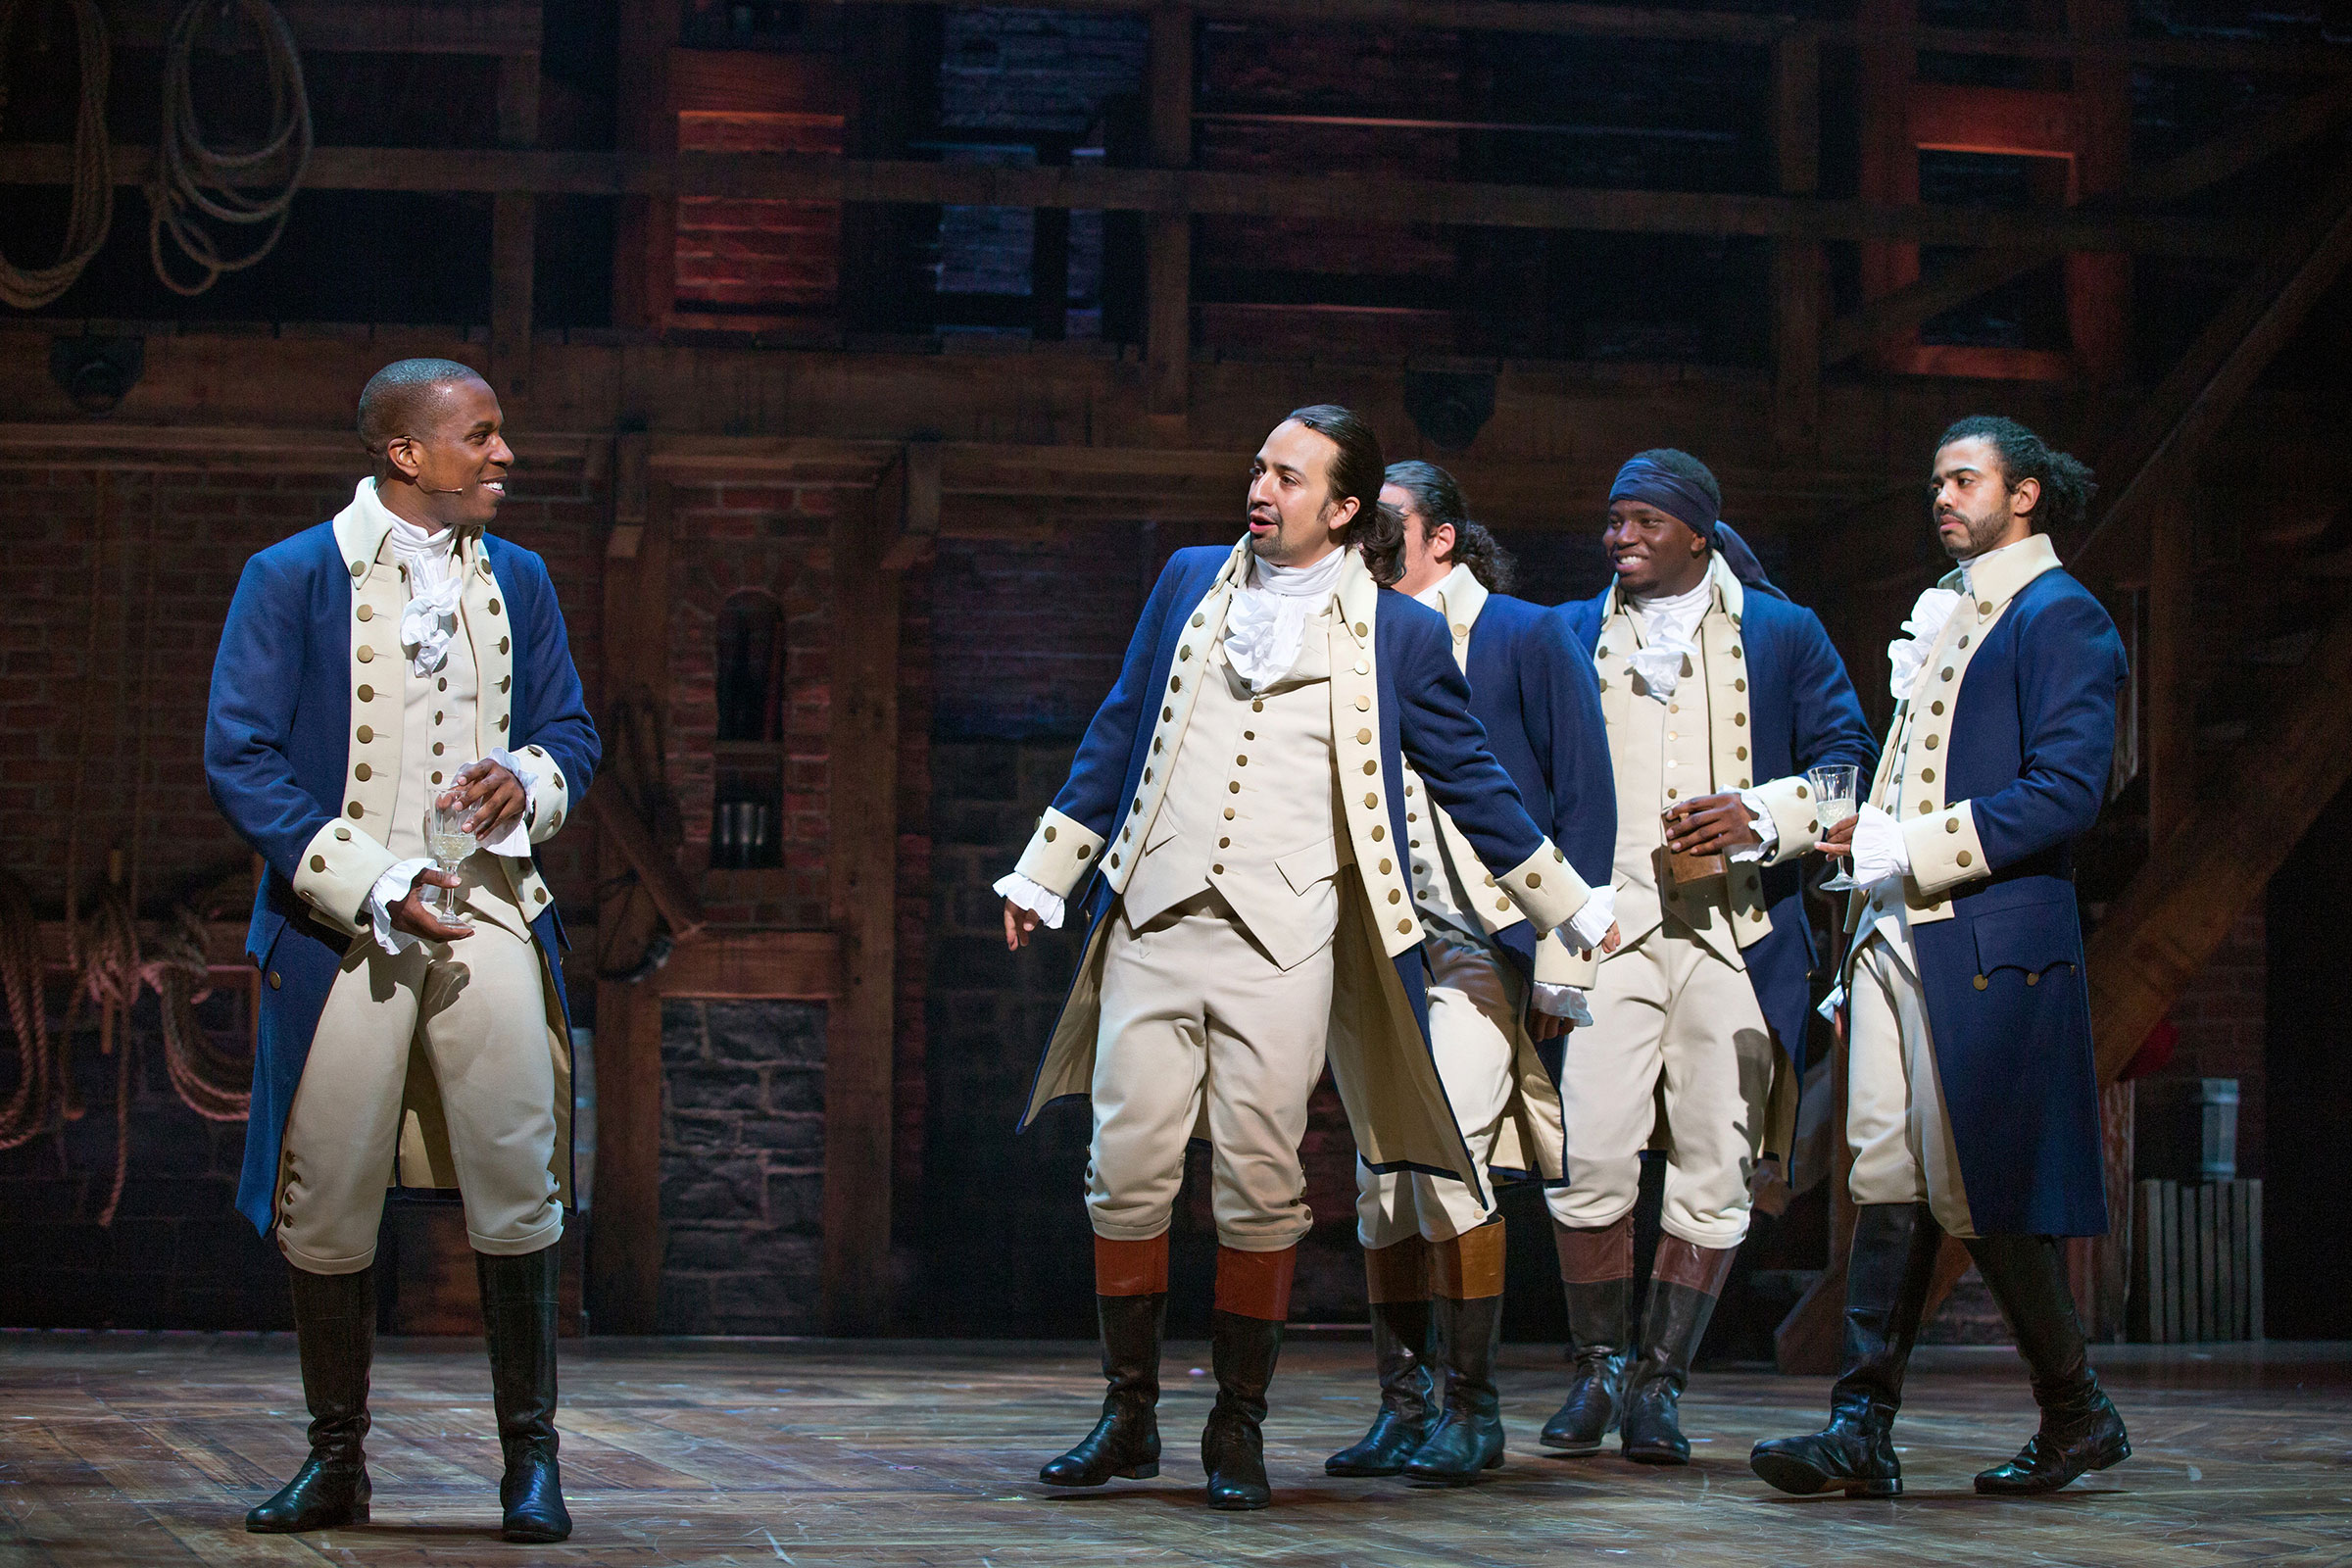 From left, Leslie Odom Jr., Lin-Manuel Miranda, Anthony Ramos, Okieriete Onaodowan and Daveed Diggs in "Hamilton" at the Richard Rodgers Theater in New York, July 11, 2015.